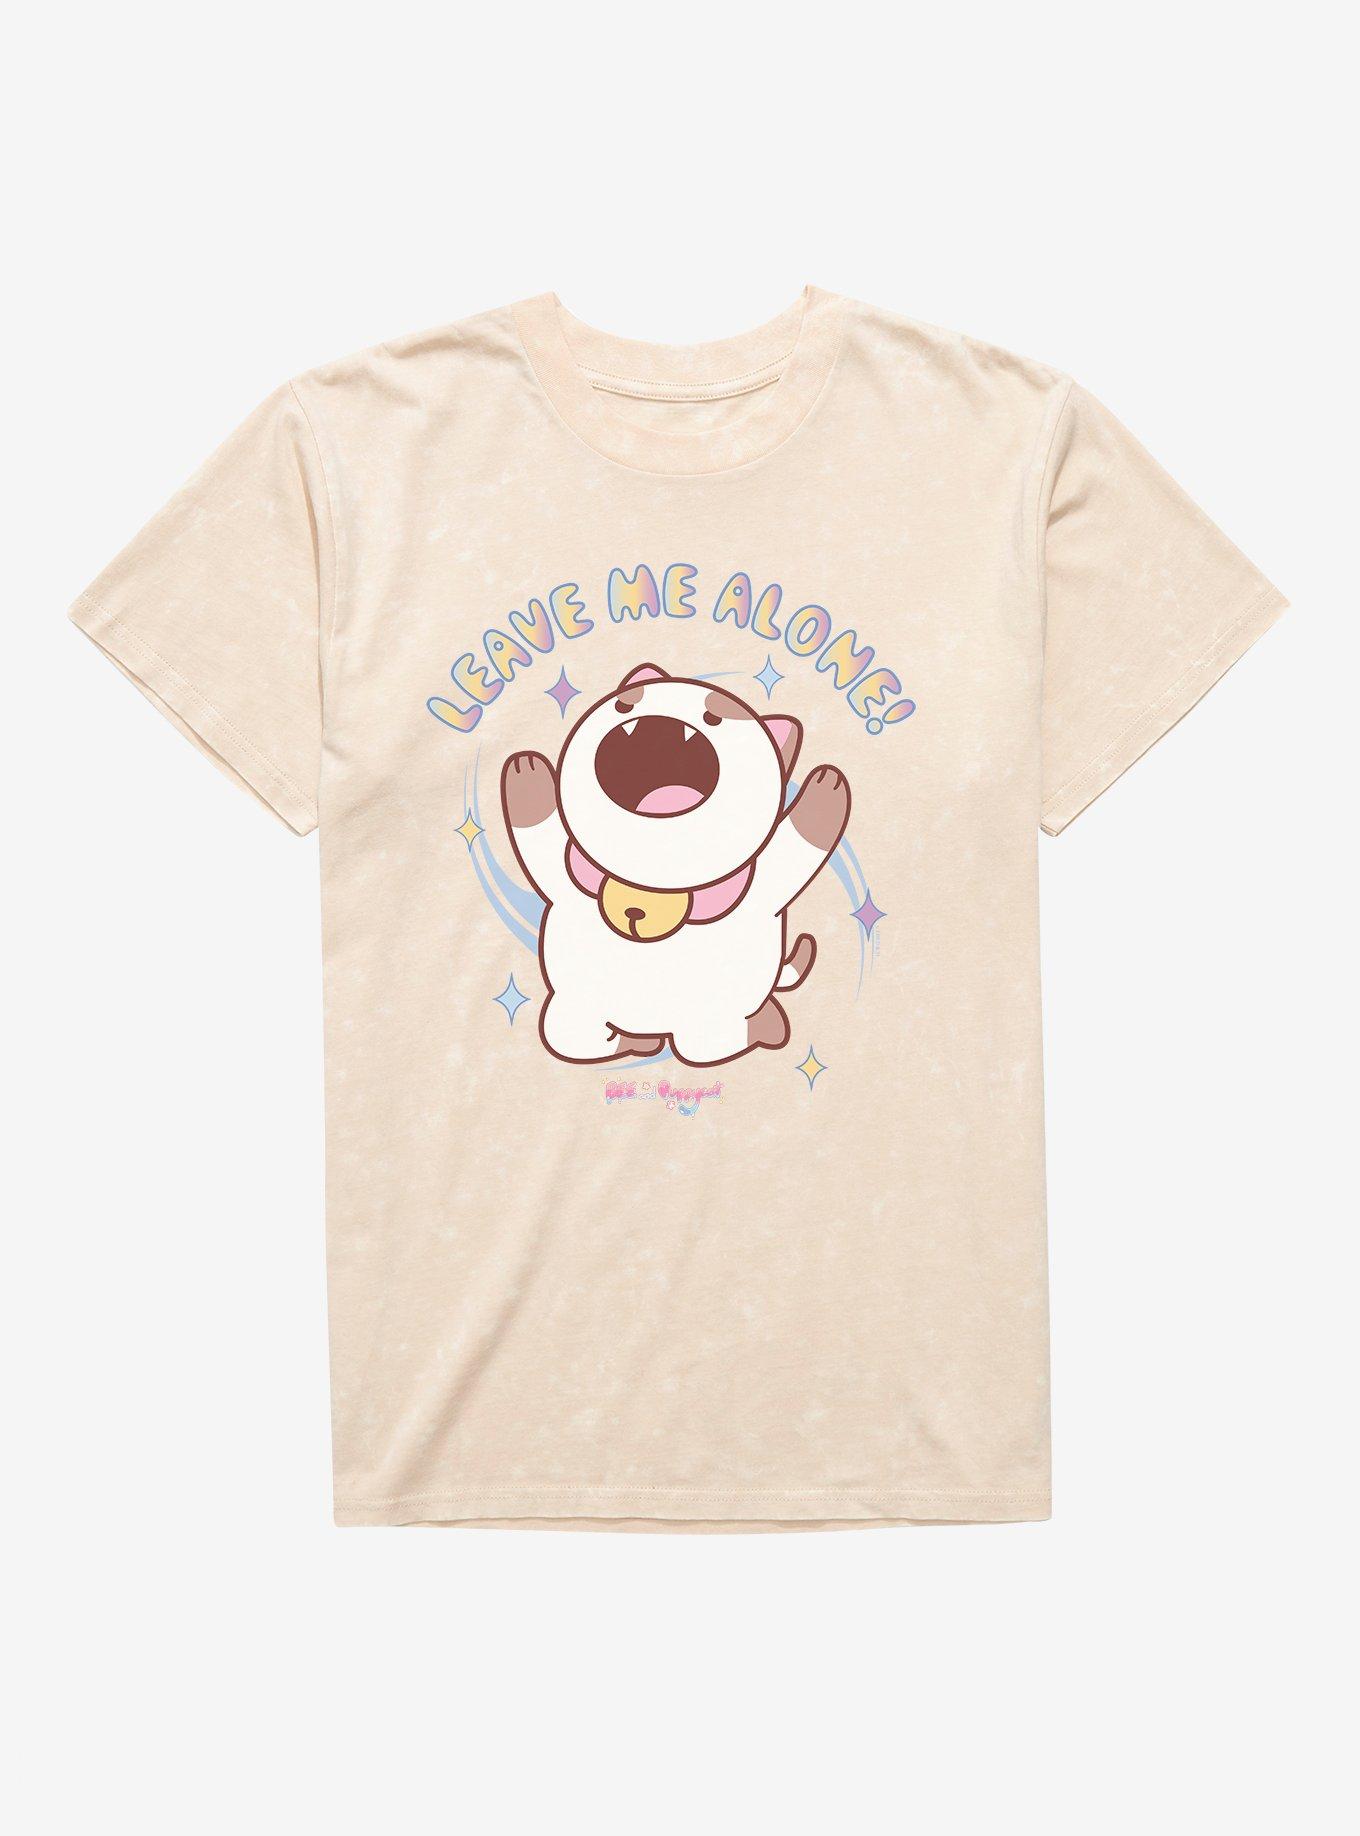 Bee And PuppyCat Leave Me Alone Mineral Wash T-Shirt, NATURAL MINERAL WASH, hi-res